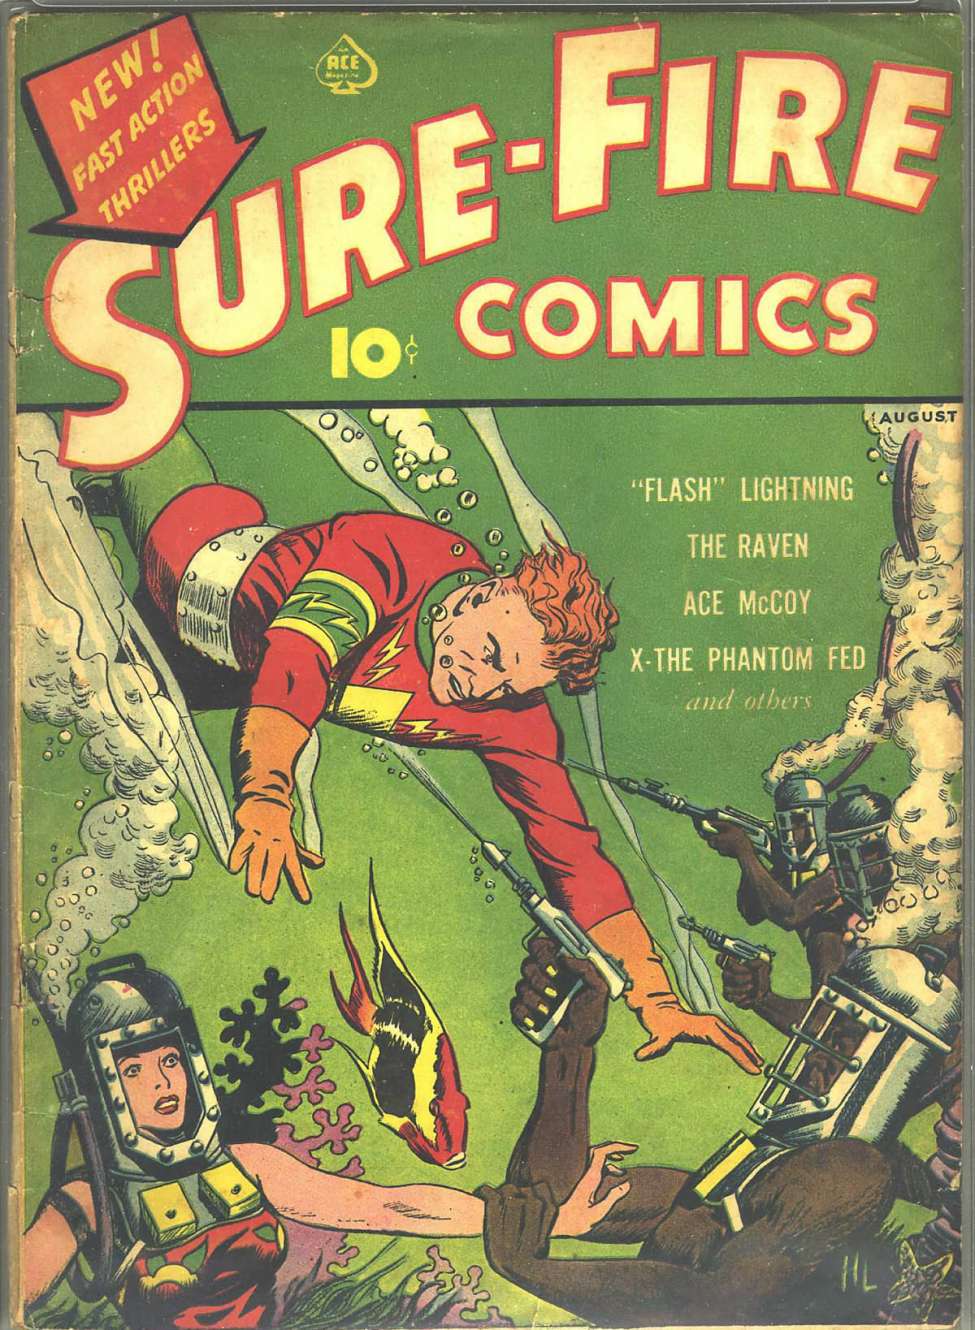 Book Cover For Sure-Fire Comics 2